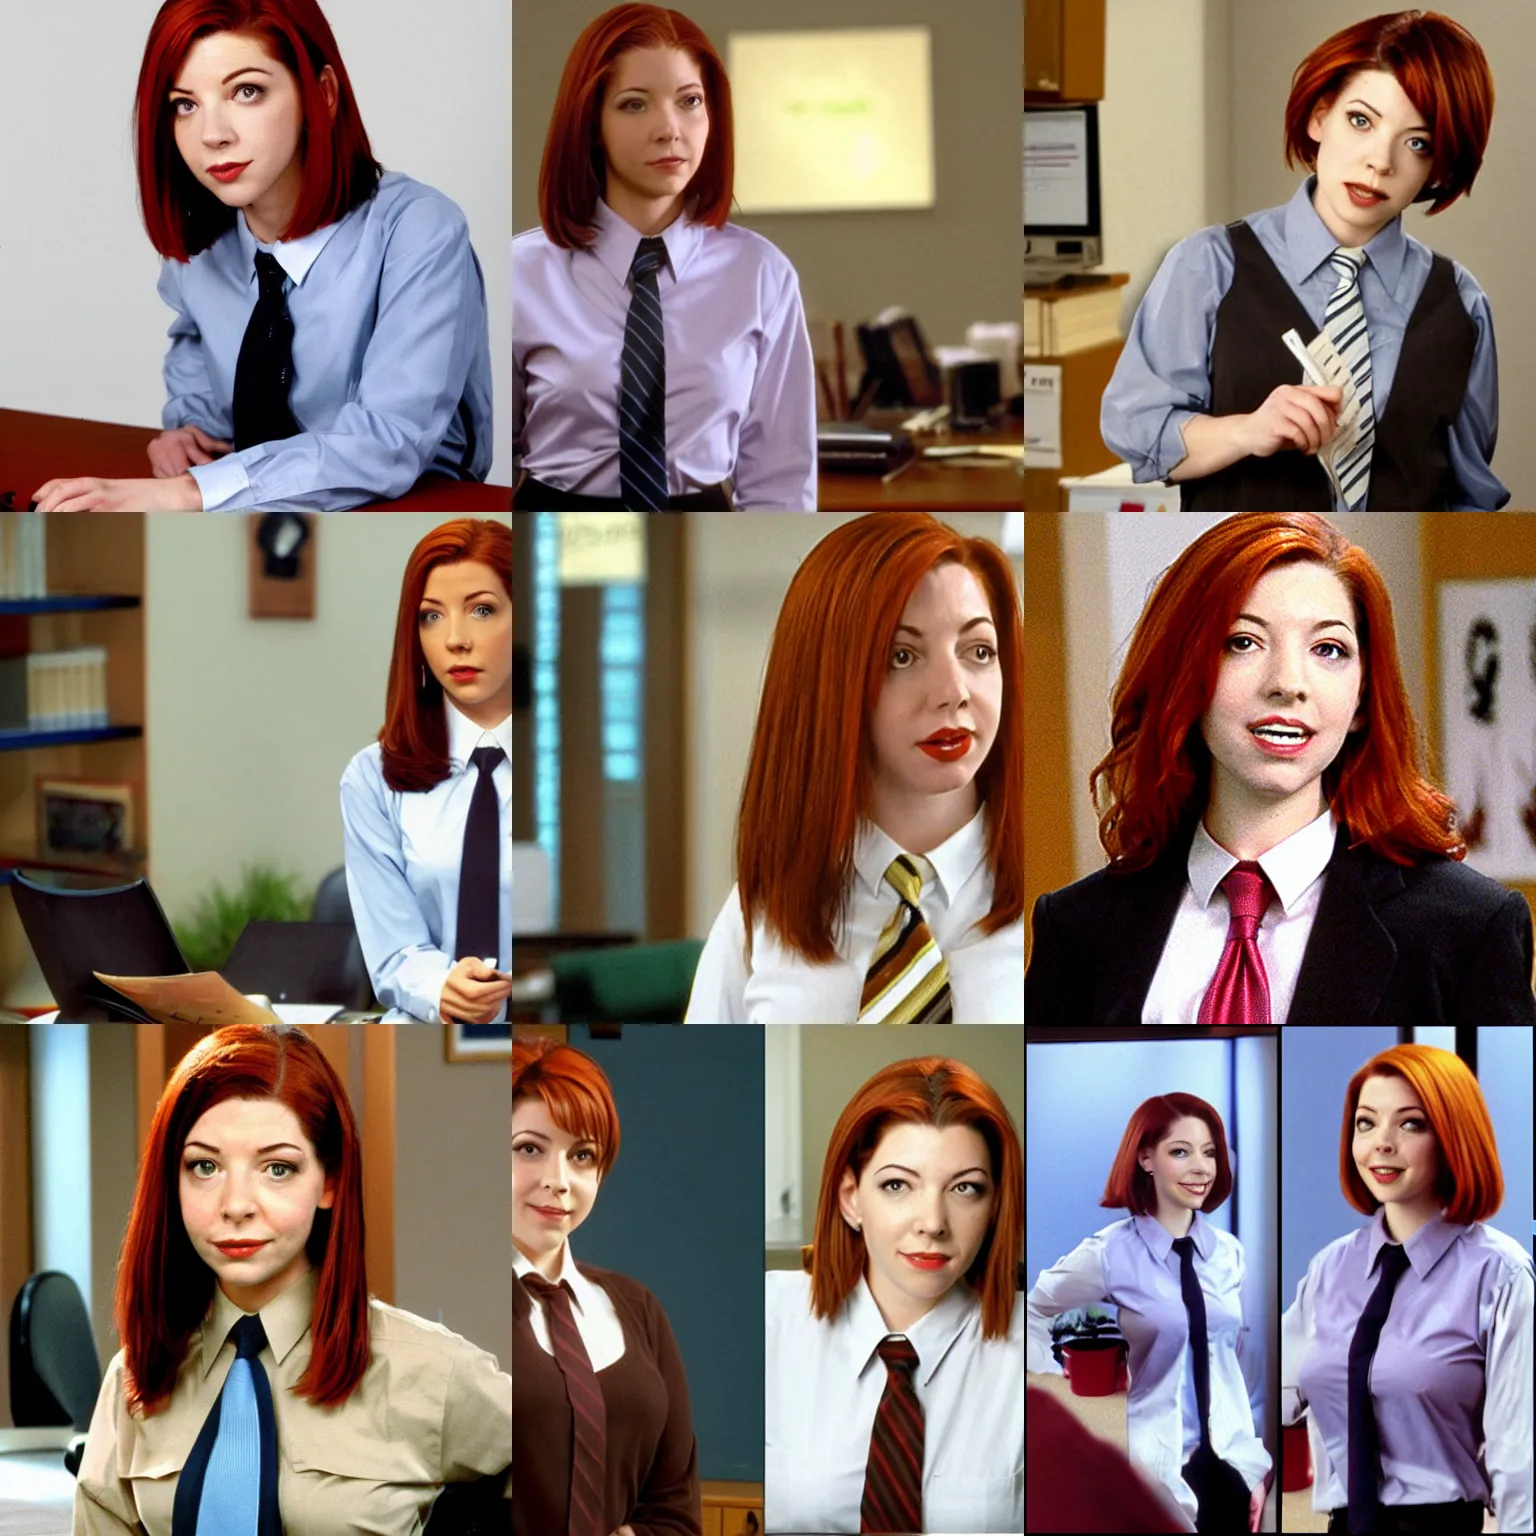 Prompt: Willow Rosenberg working as an office manager, wearing a shirt and tie